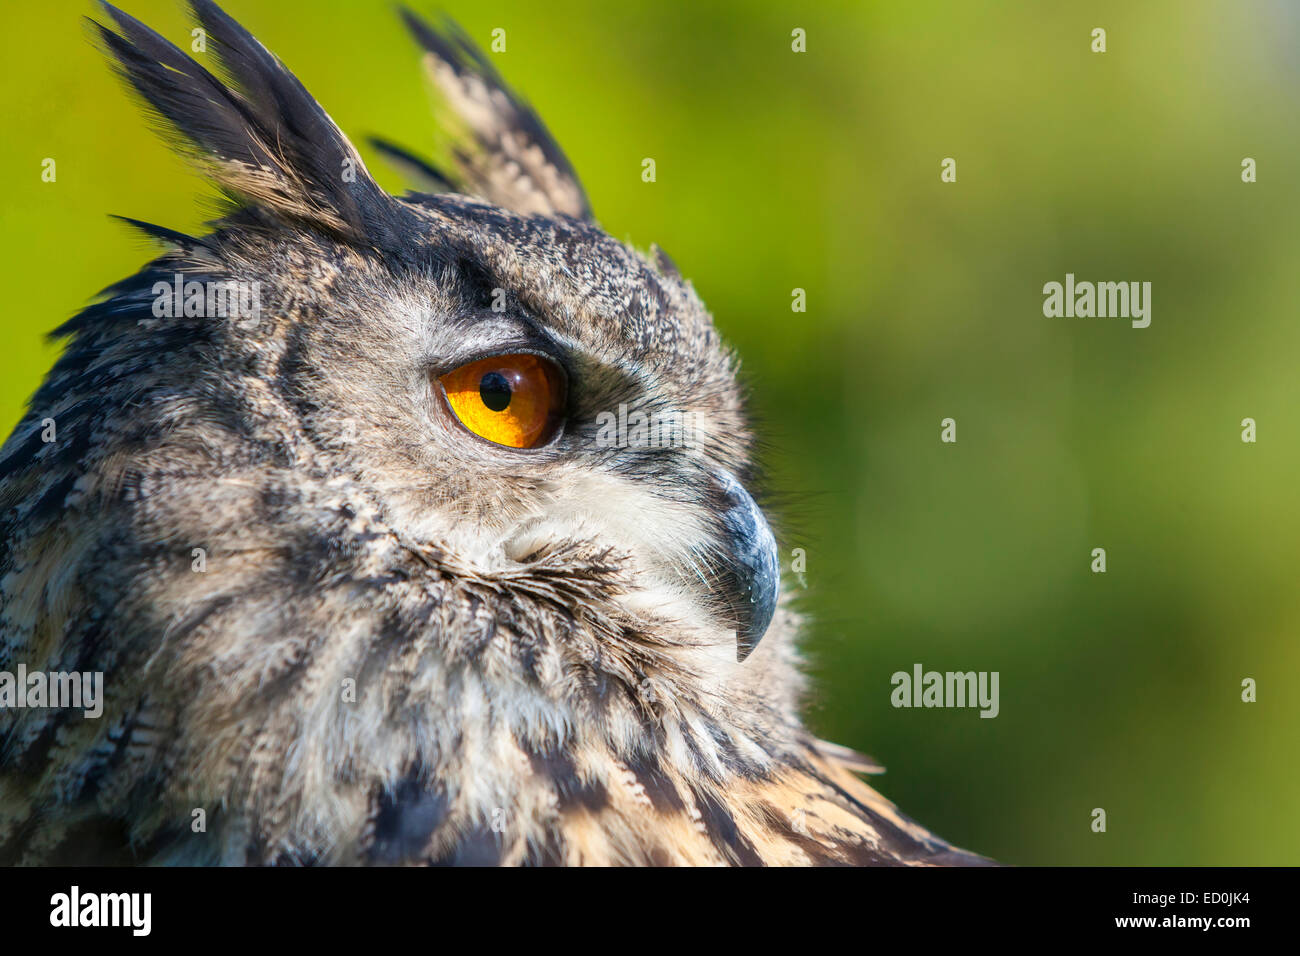 European or Eurasian Eagle Owl, Bubo Bubo, with big orange eyes and a natural green background Stock Photo